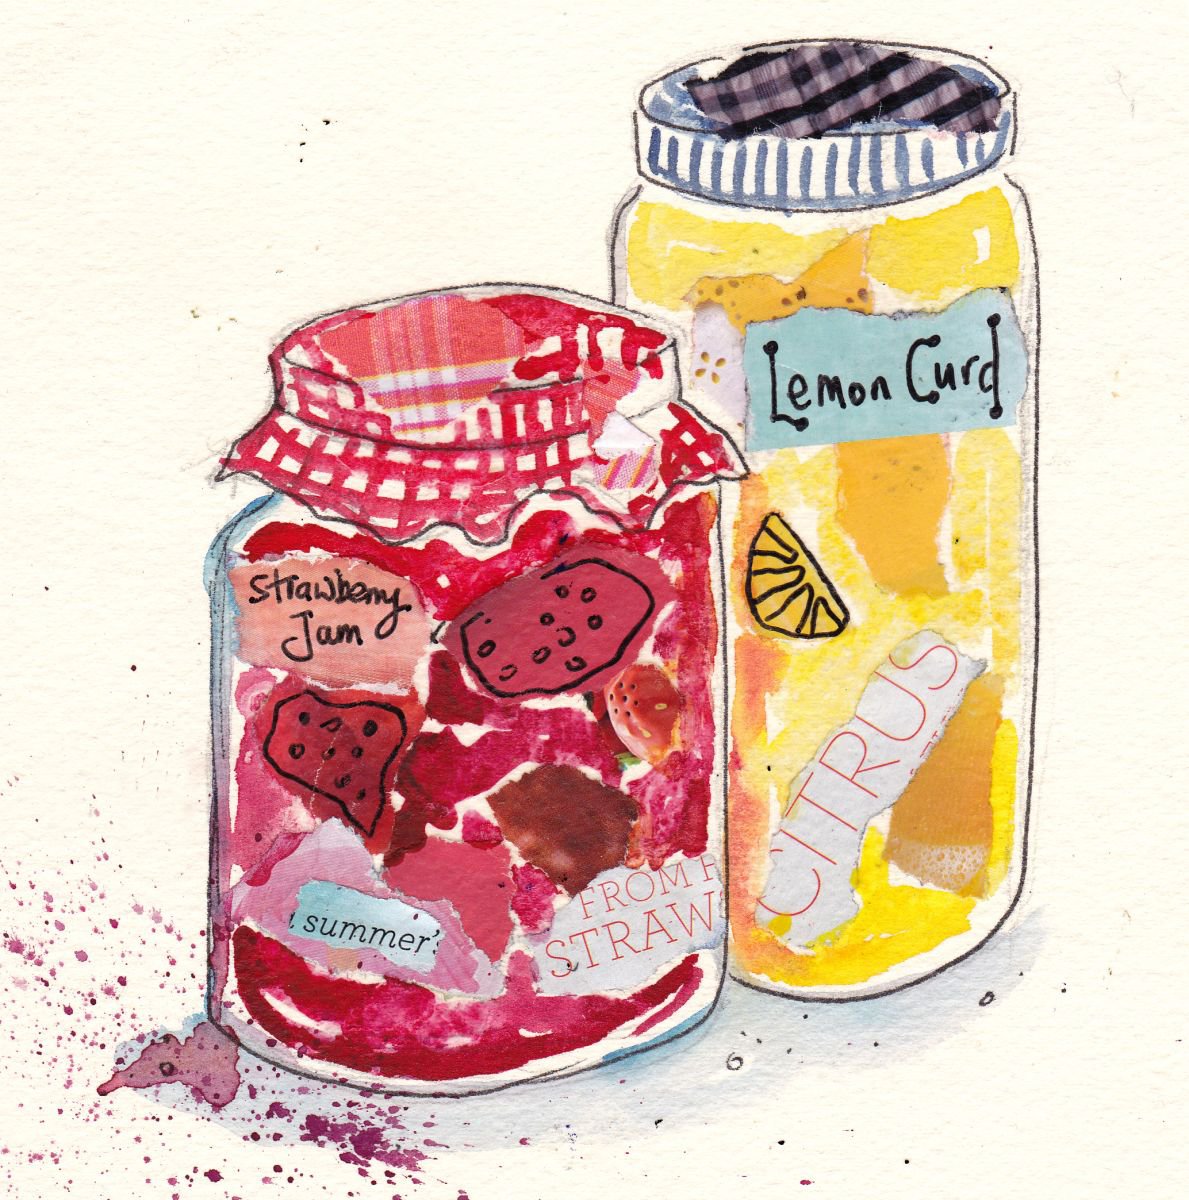 Strawberry Jam and Lemon Curd by Julia Rigby